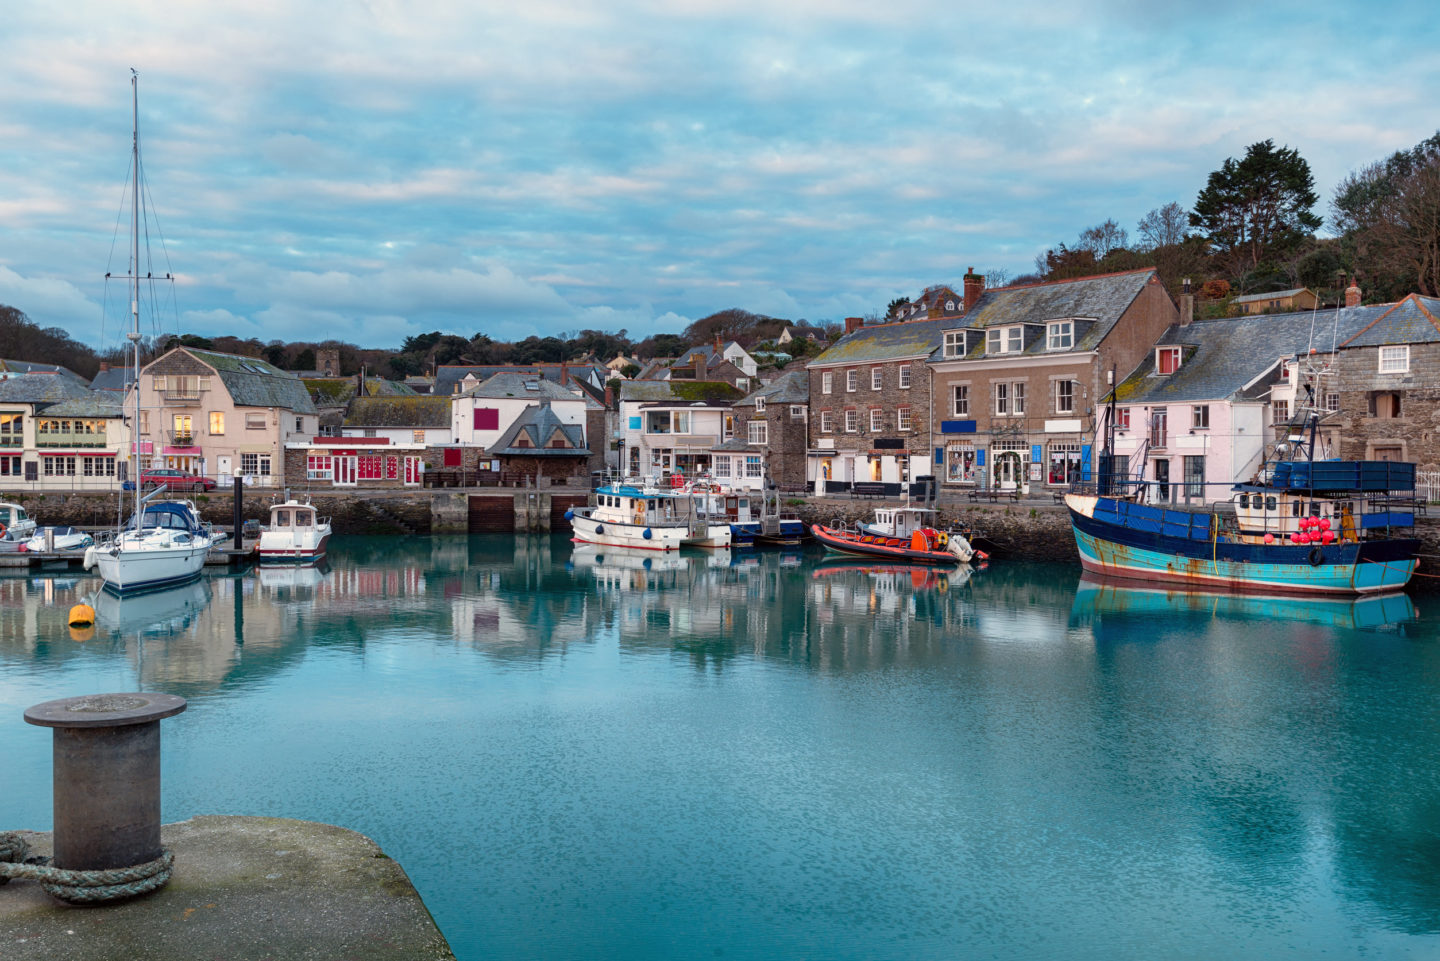 most beautiful places in cornwall - Padstow